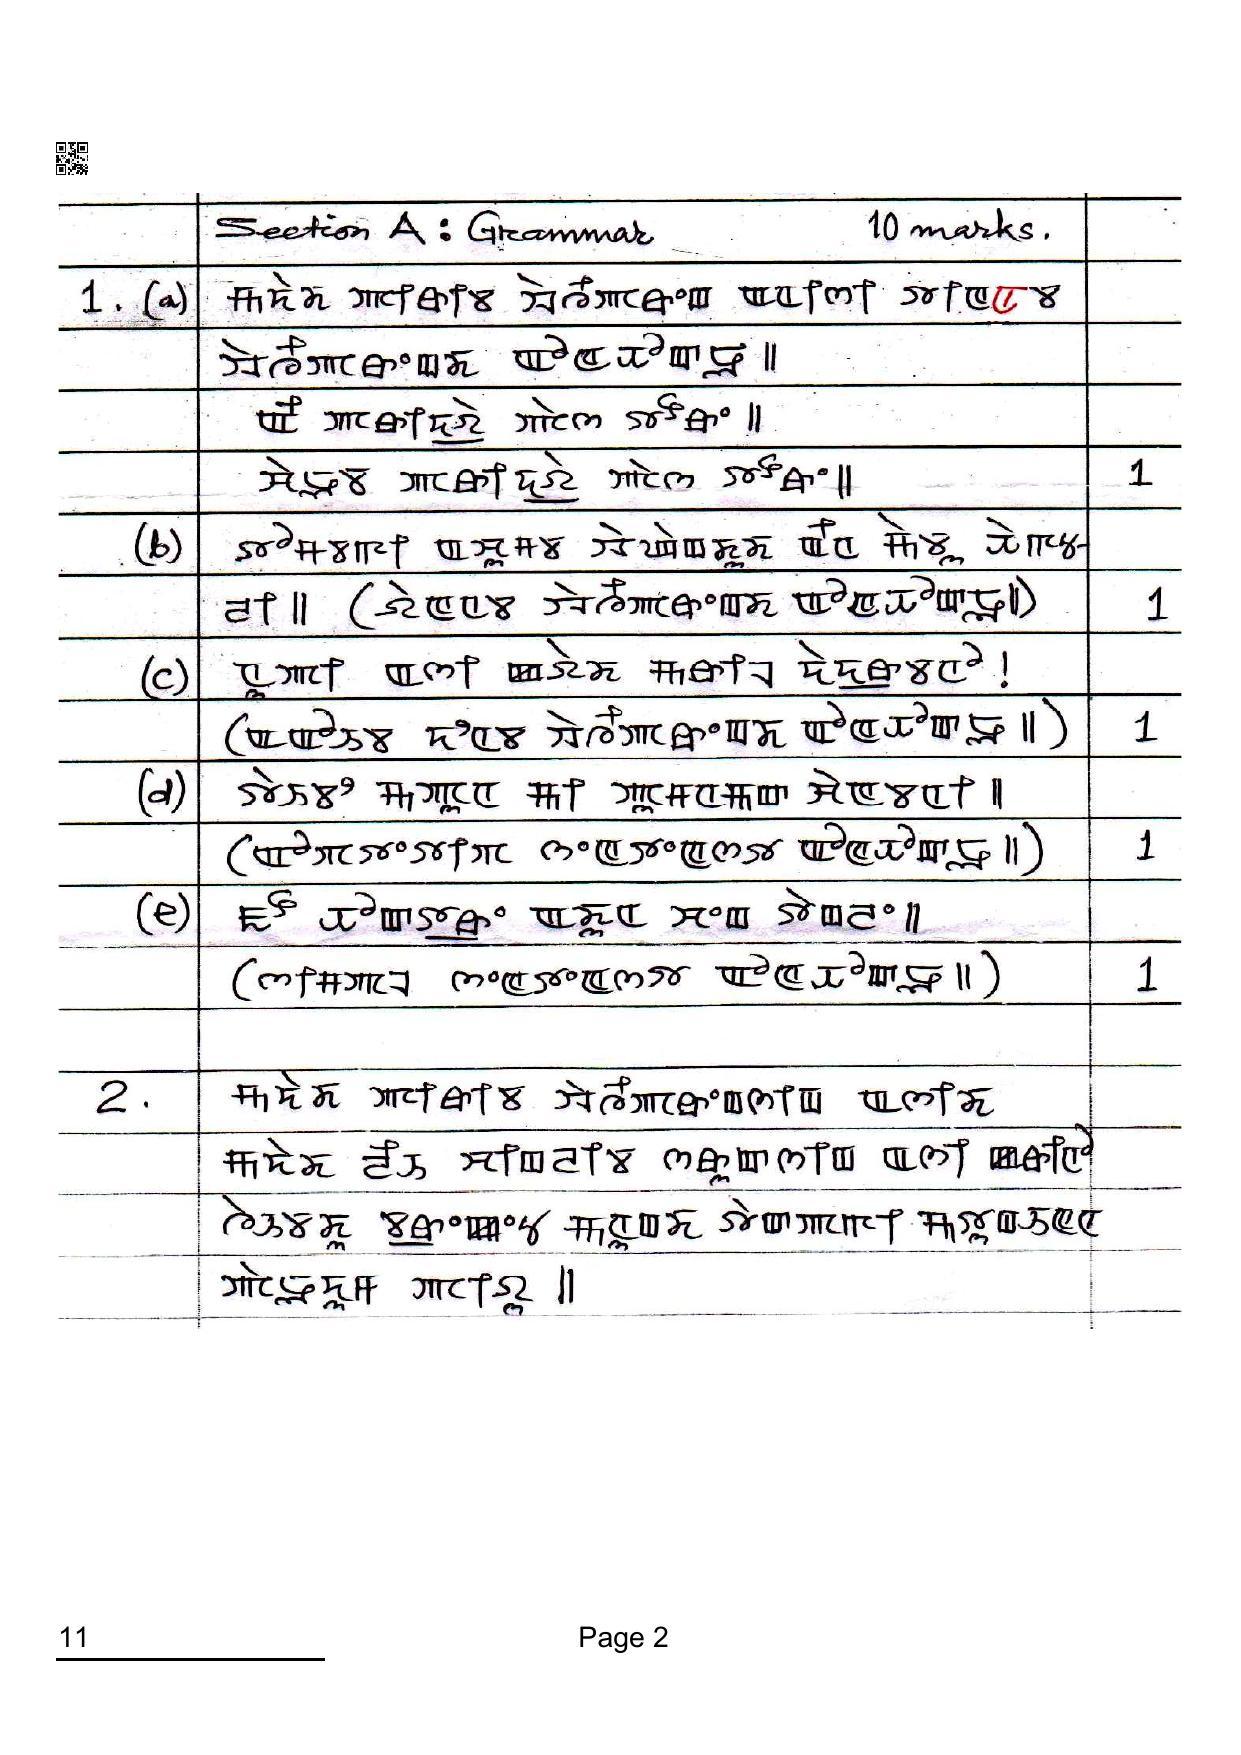 CBSE Class 12 11_Manipuri 2022 Question Paper - Page 2